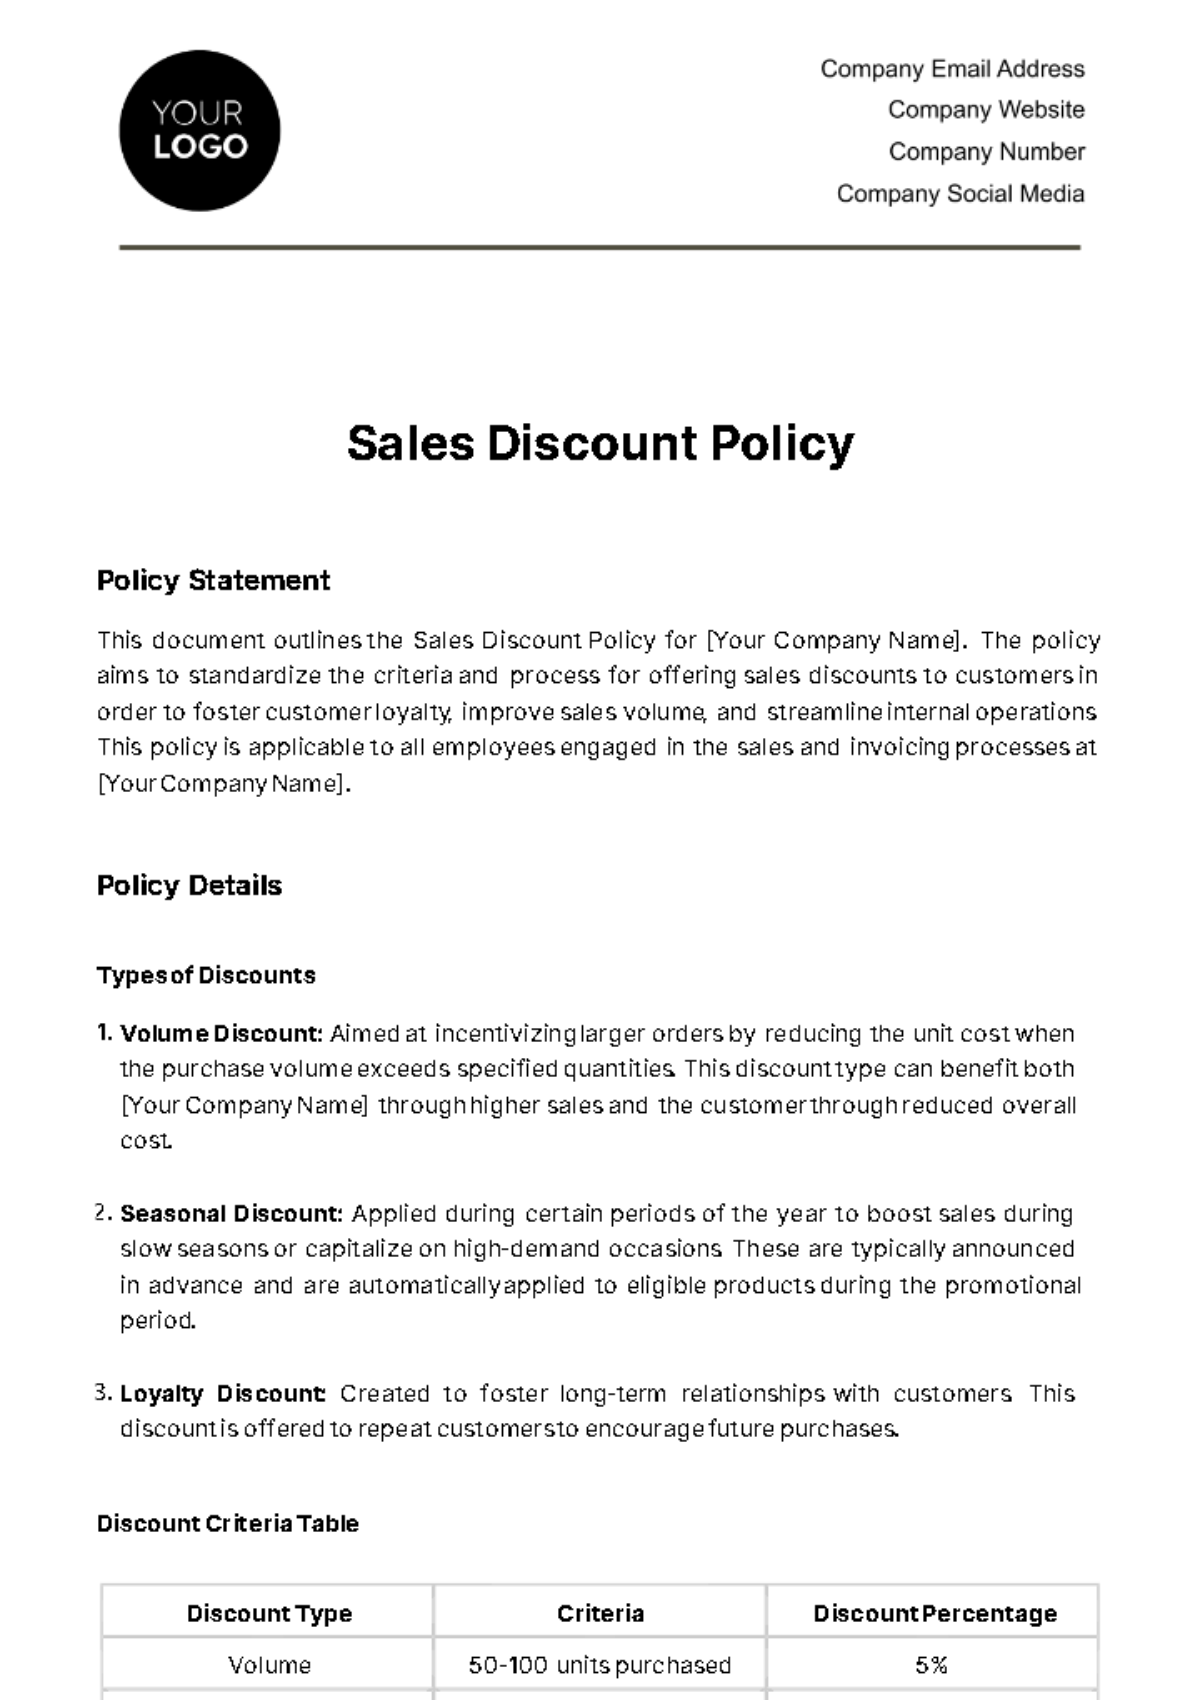 Sales Discount Policy Template